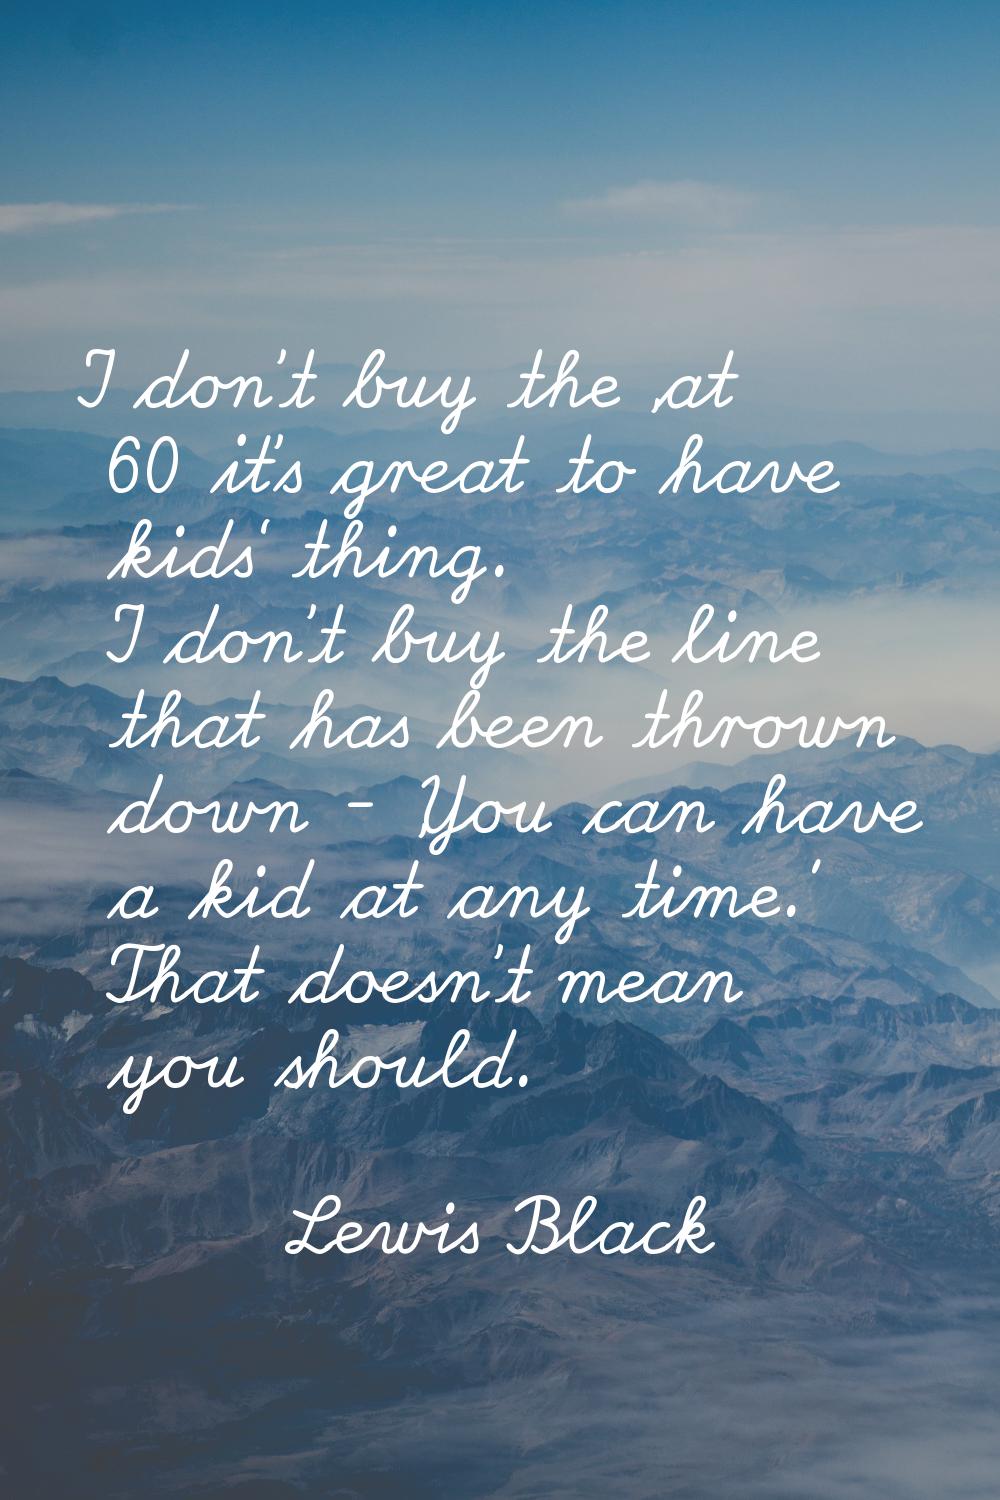 I don't buy the 'at 60 it's great to have kids' thing. I don't buy the line that has been thrown do